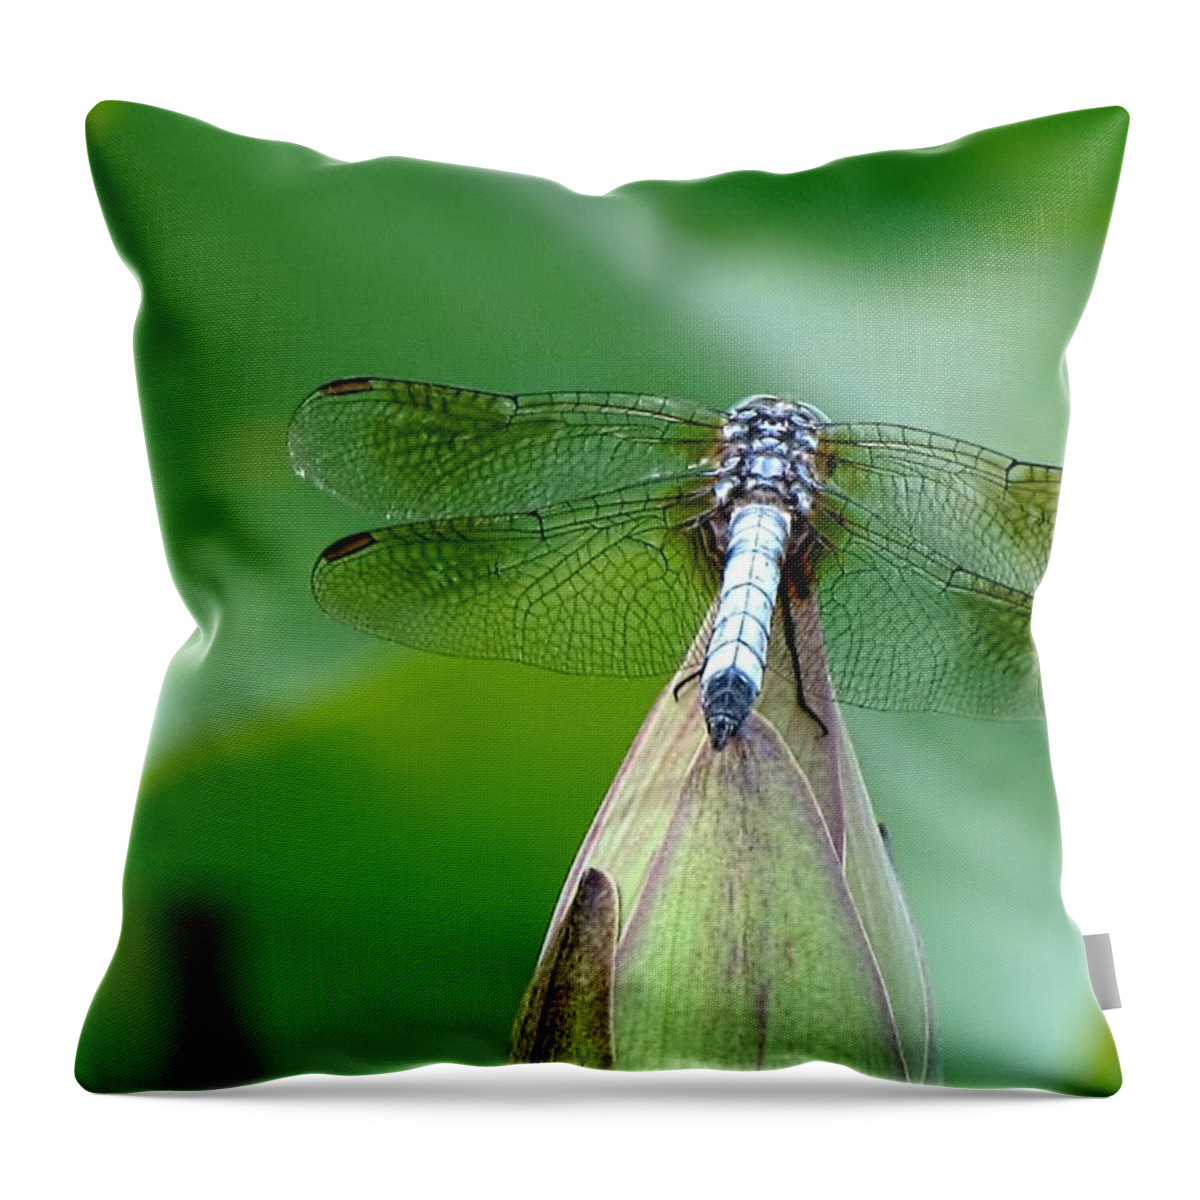 Dragonfly Throw Pillow featuring the photograph Just Visiting by Jennifer Wheatley Wolf